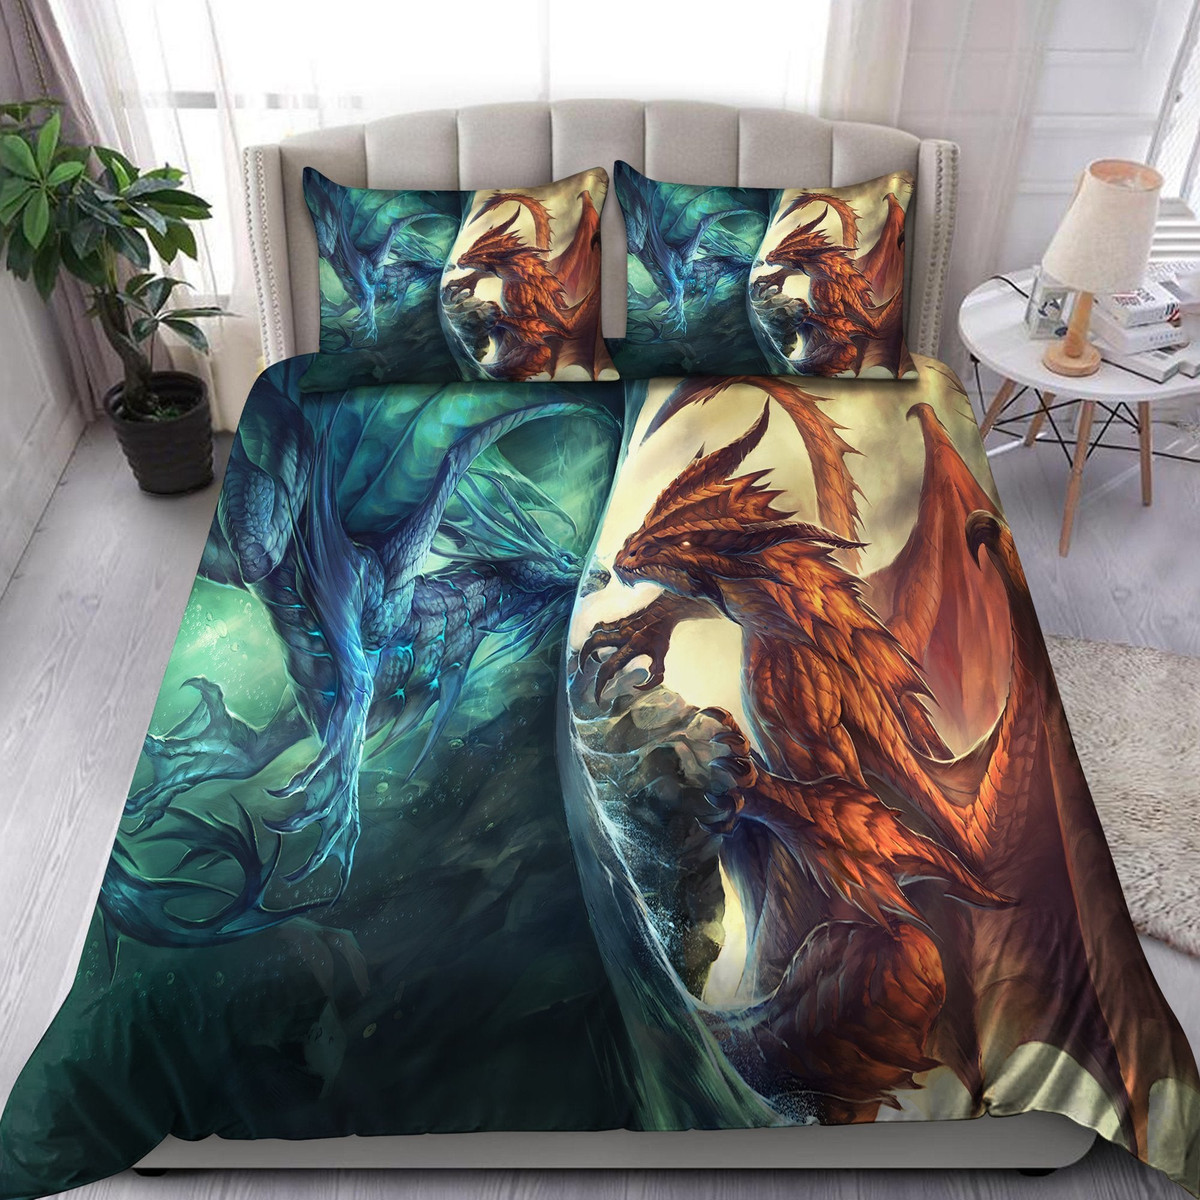 Couple Dragon 3D All Over Printed Bedding Set